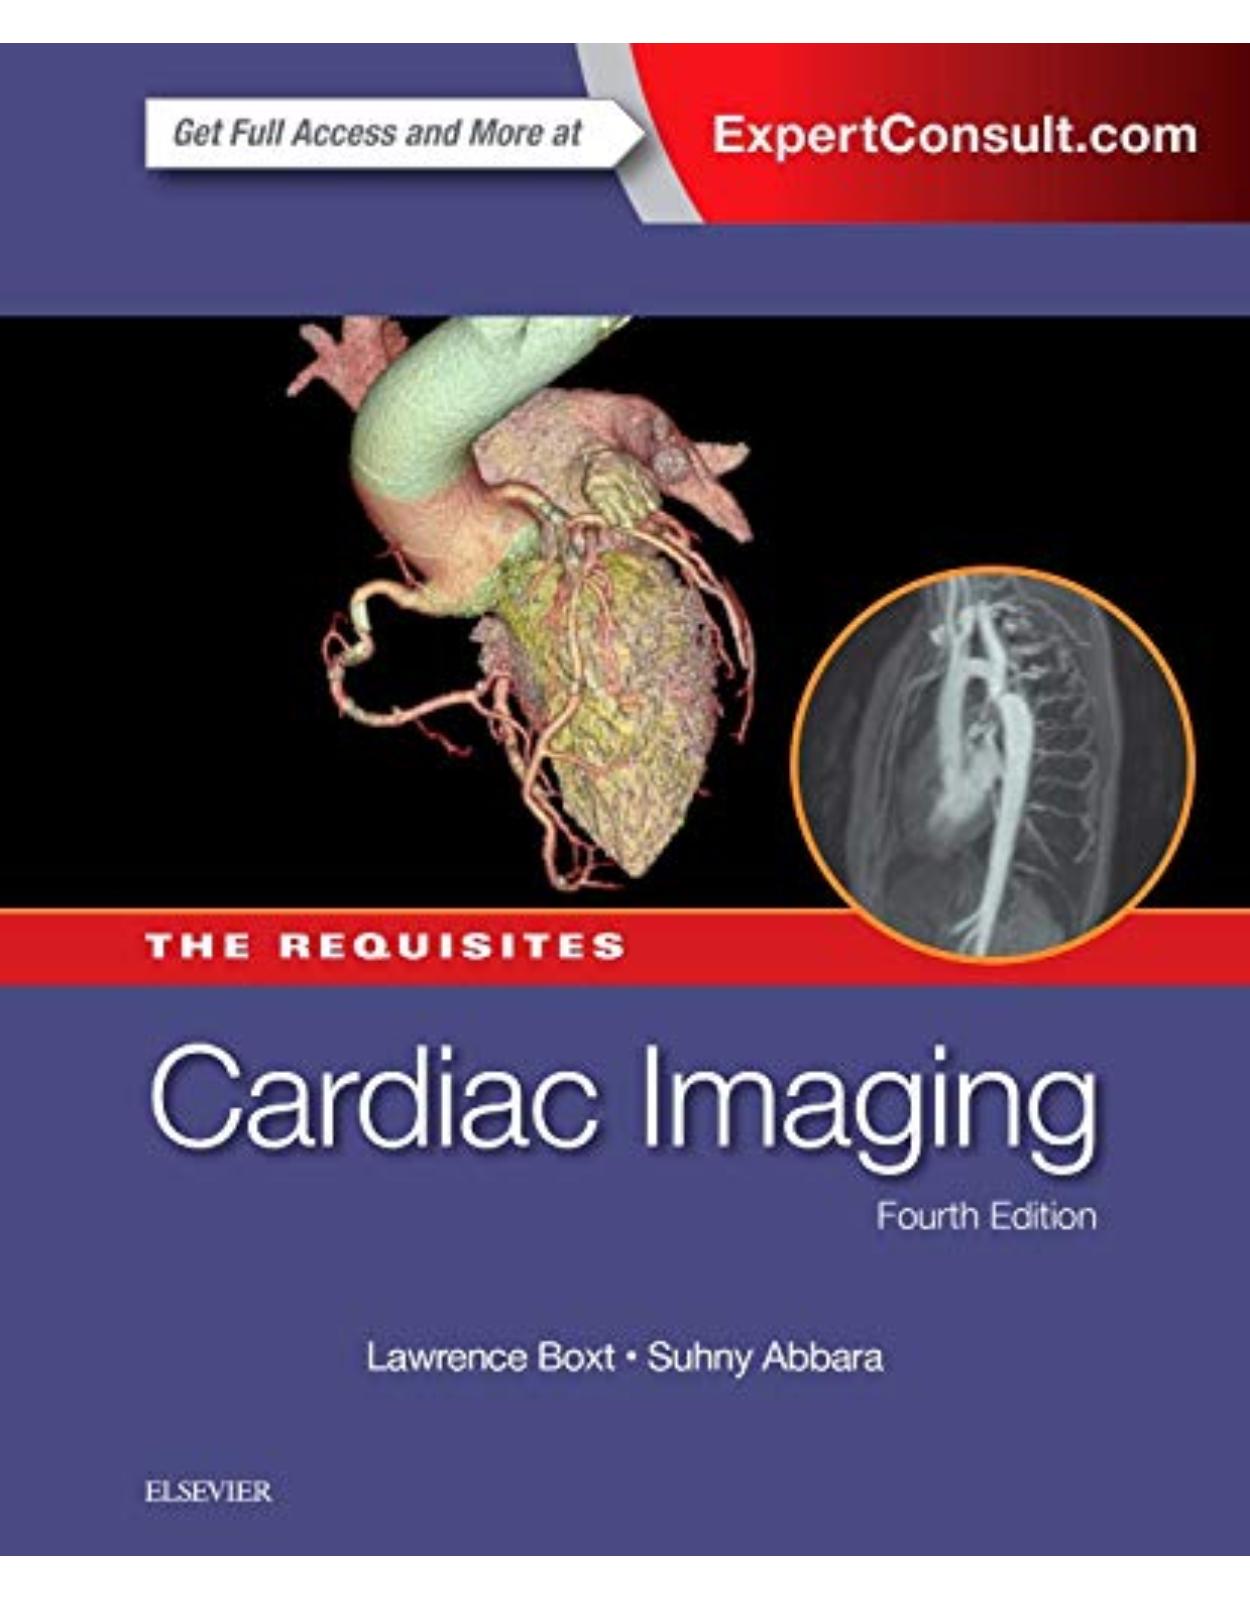 Cardiac Imaging: The Requisites, 4th Edition 